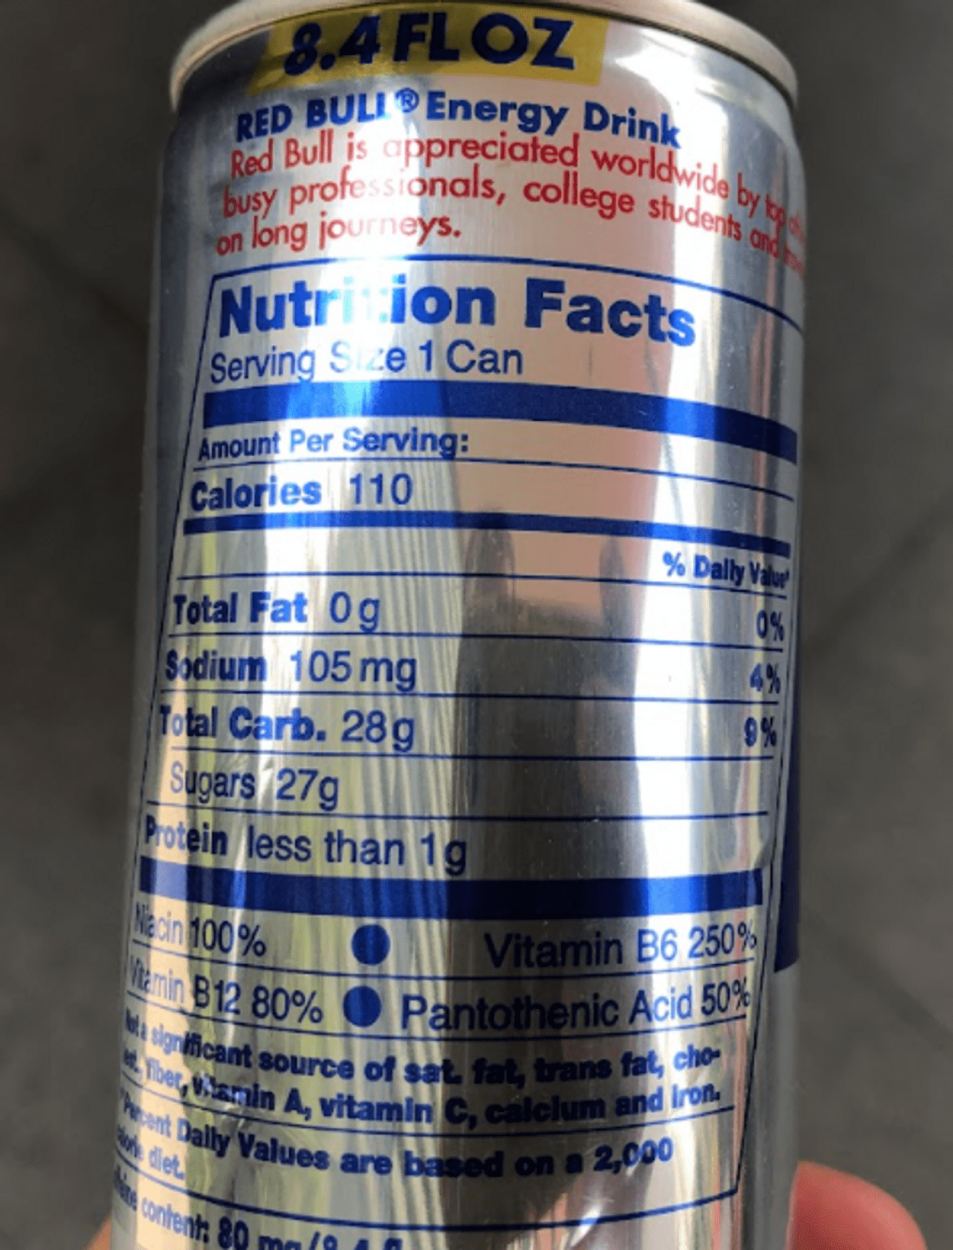 Supplement Facts of Red Bull.